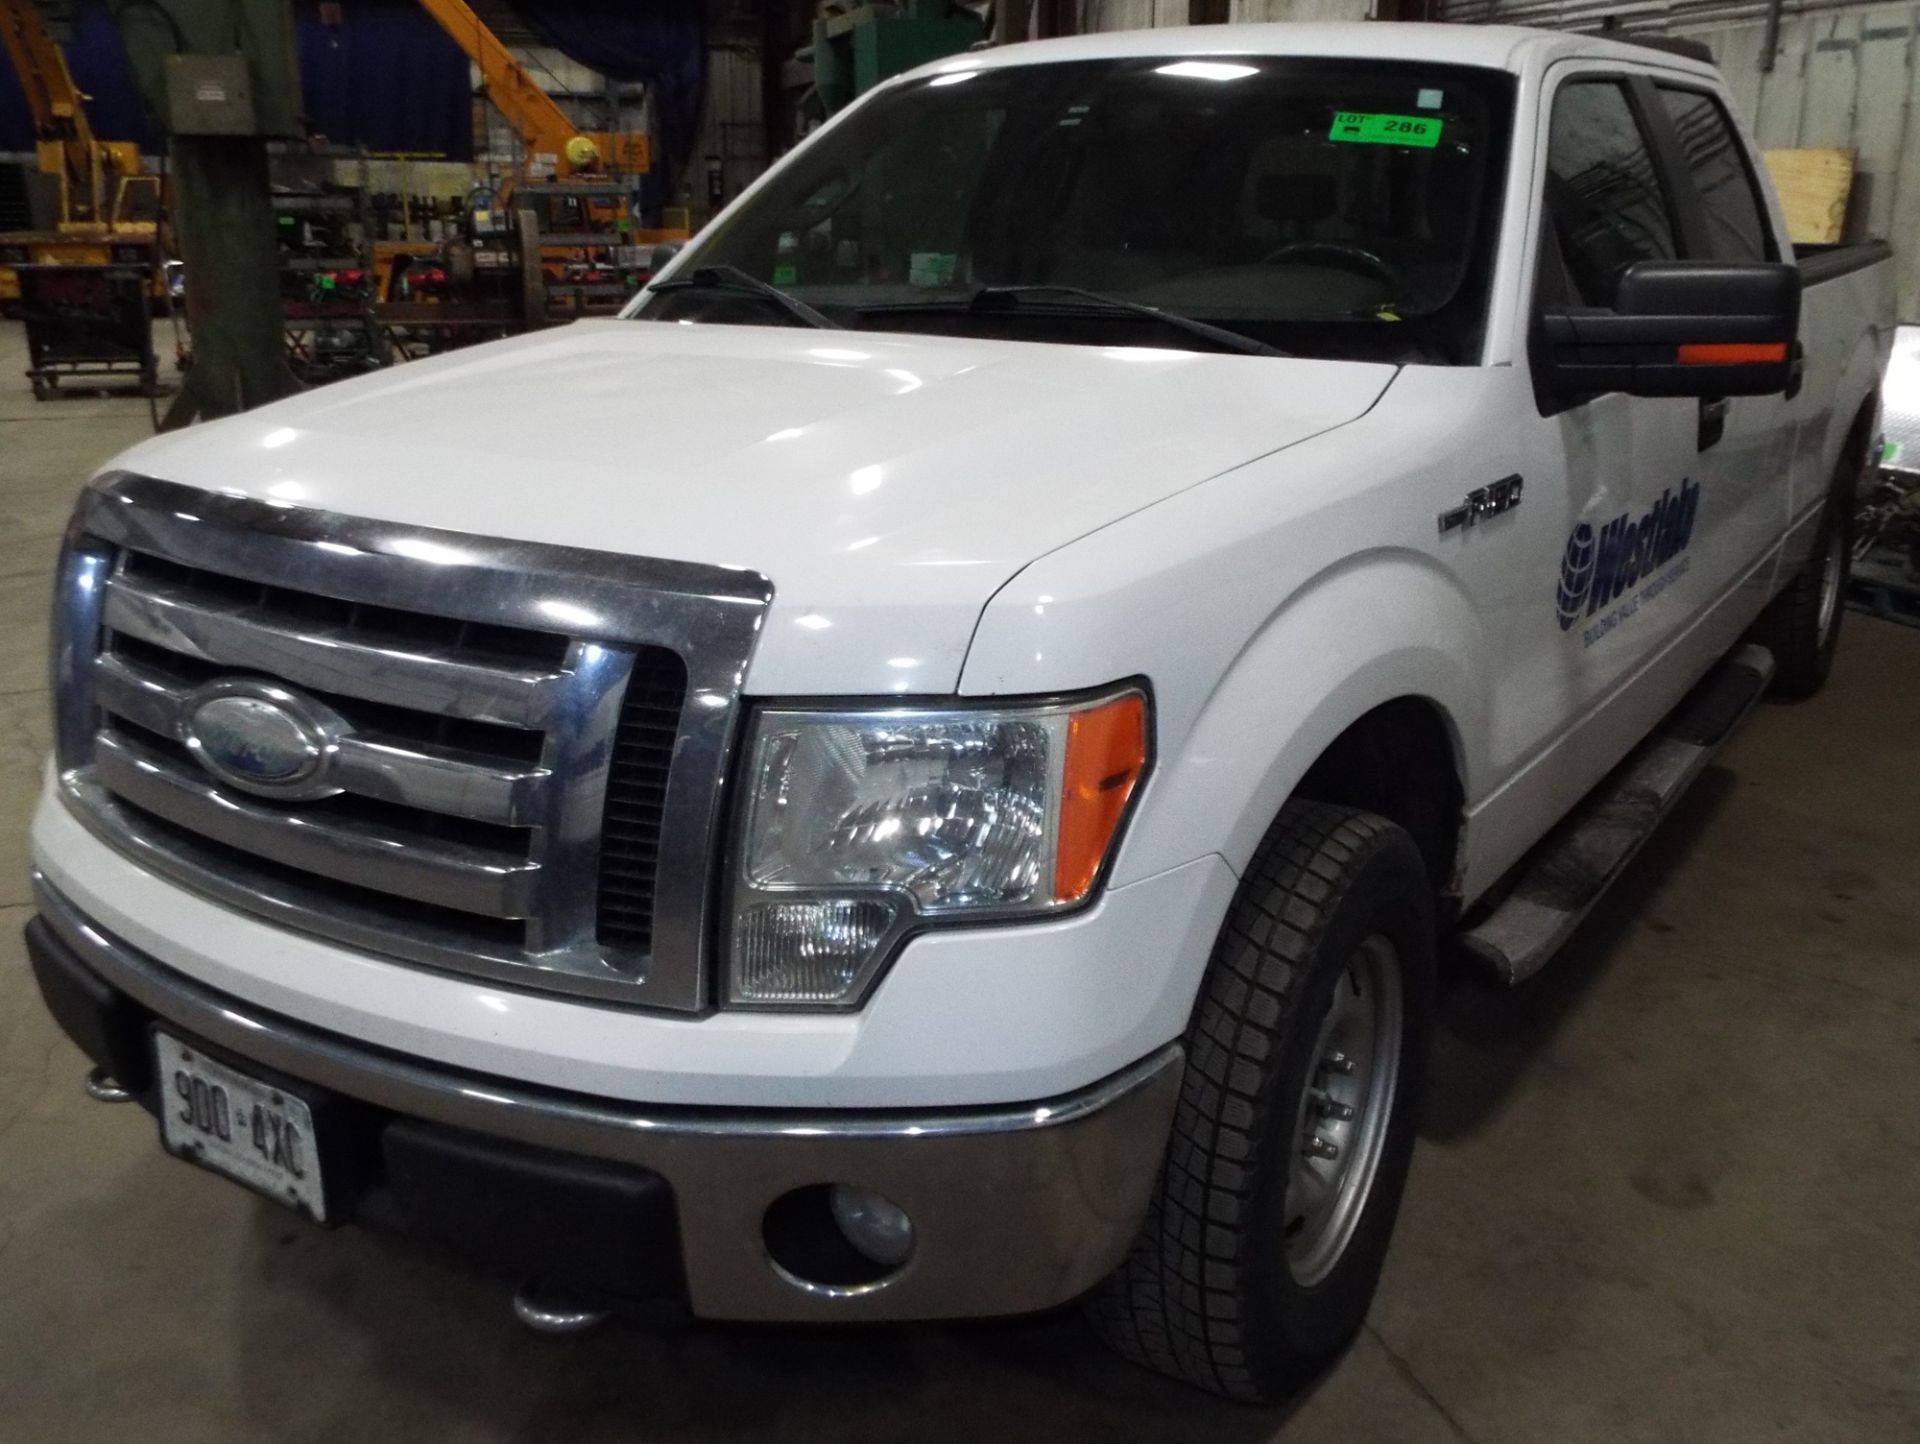 FORD (2009) F150 4 DOOR PICKUP TRUCK WITH 4.6L 8 CYLINDER ENGINE, AUTOMATIC TRANSMISSION, 4X4, A/ - Image 2 of 11